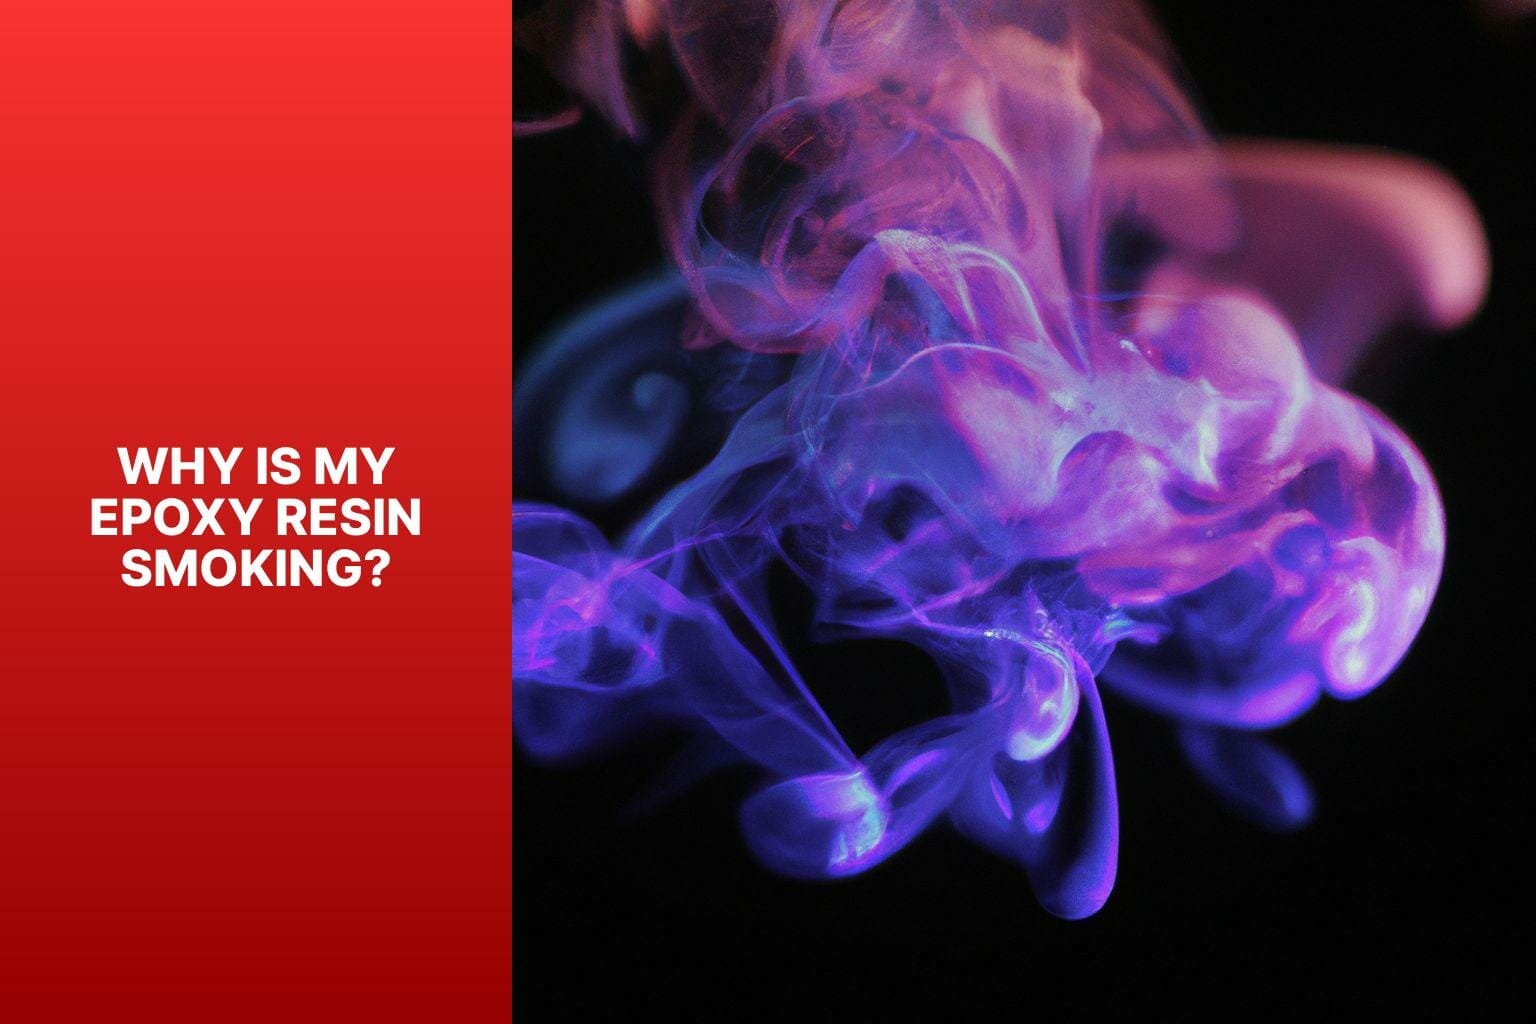 Why Is My Epoxy Resin Smoking? - why is my epoxy resin smoking 